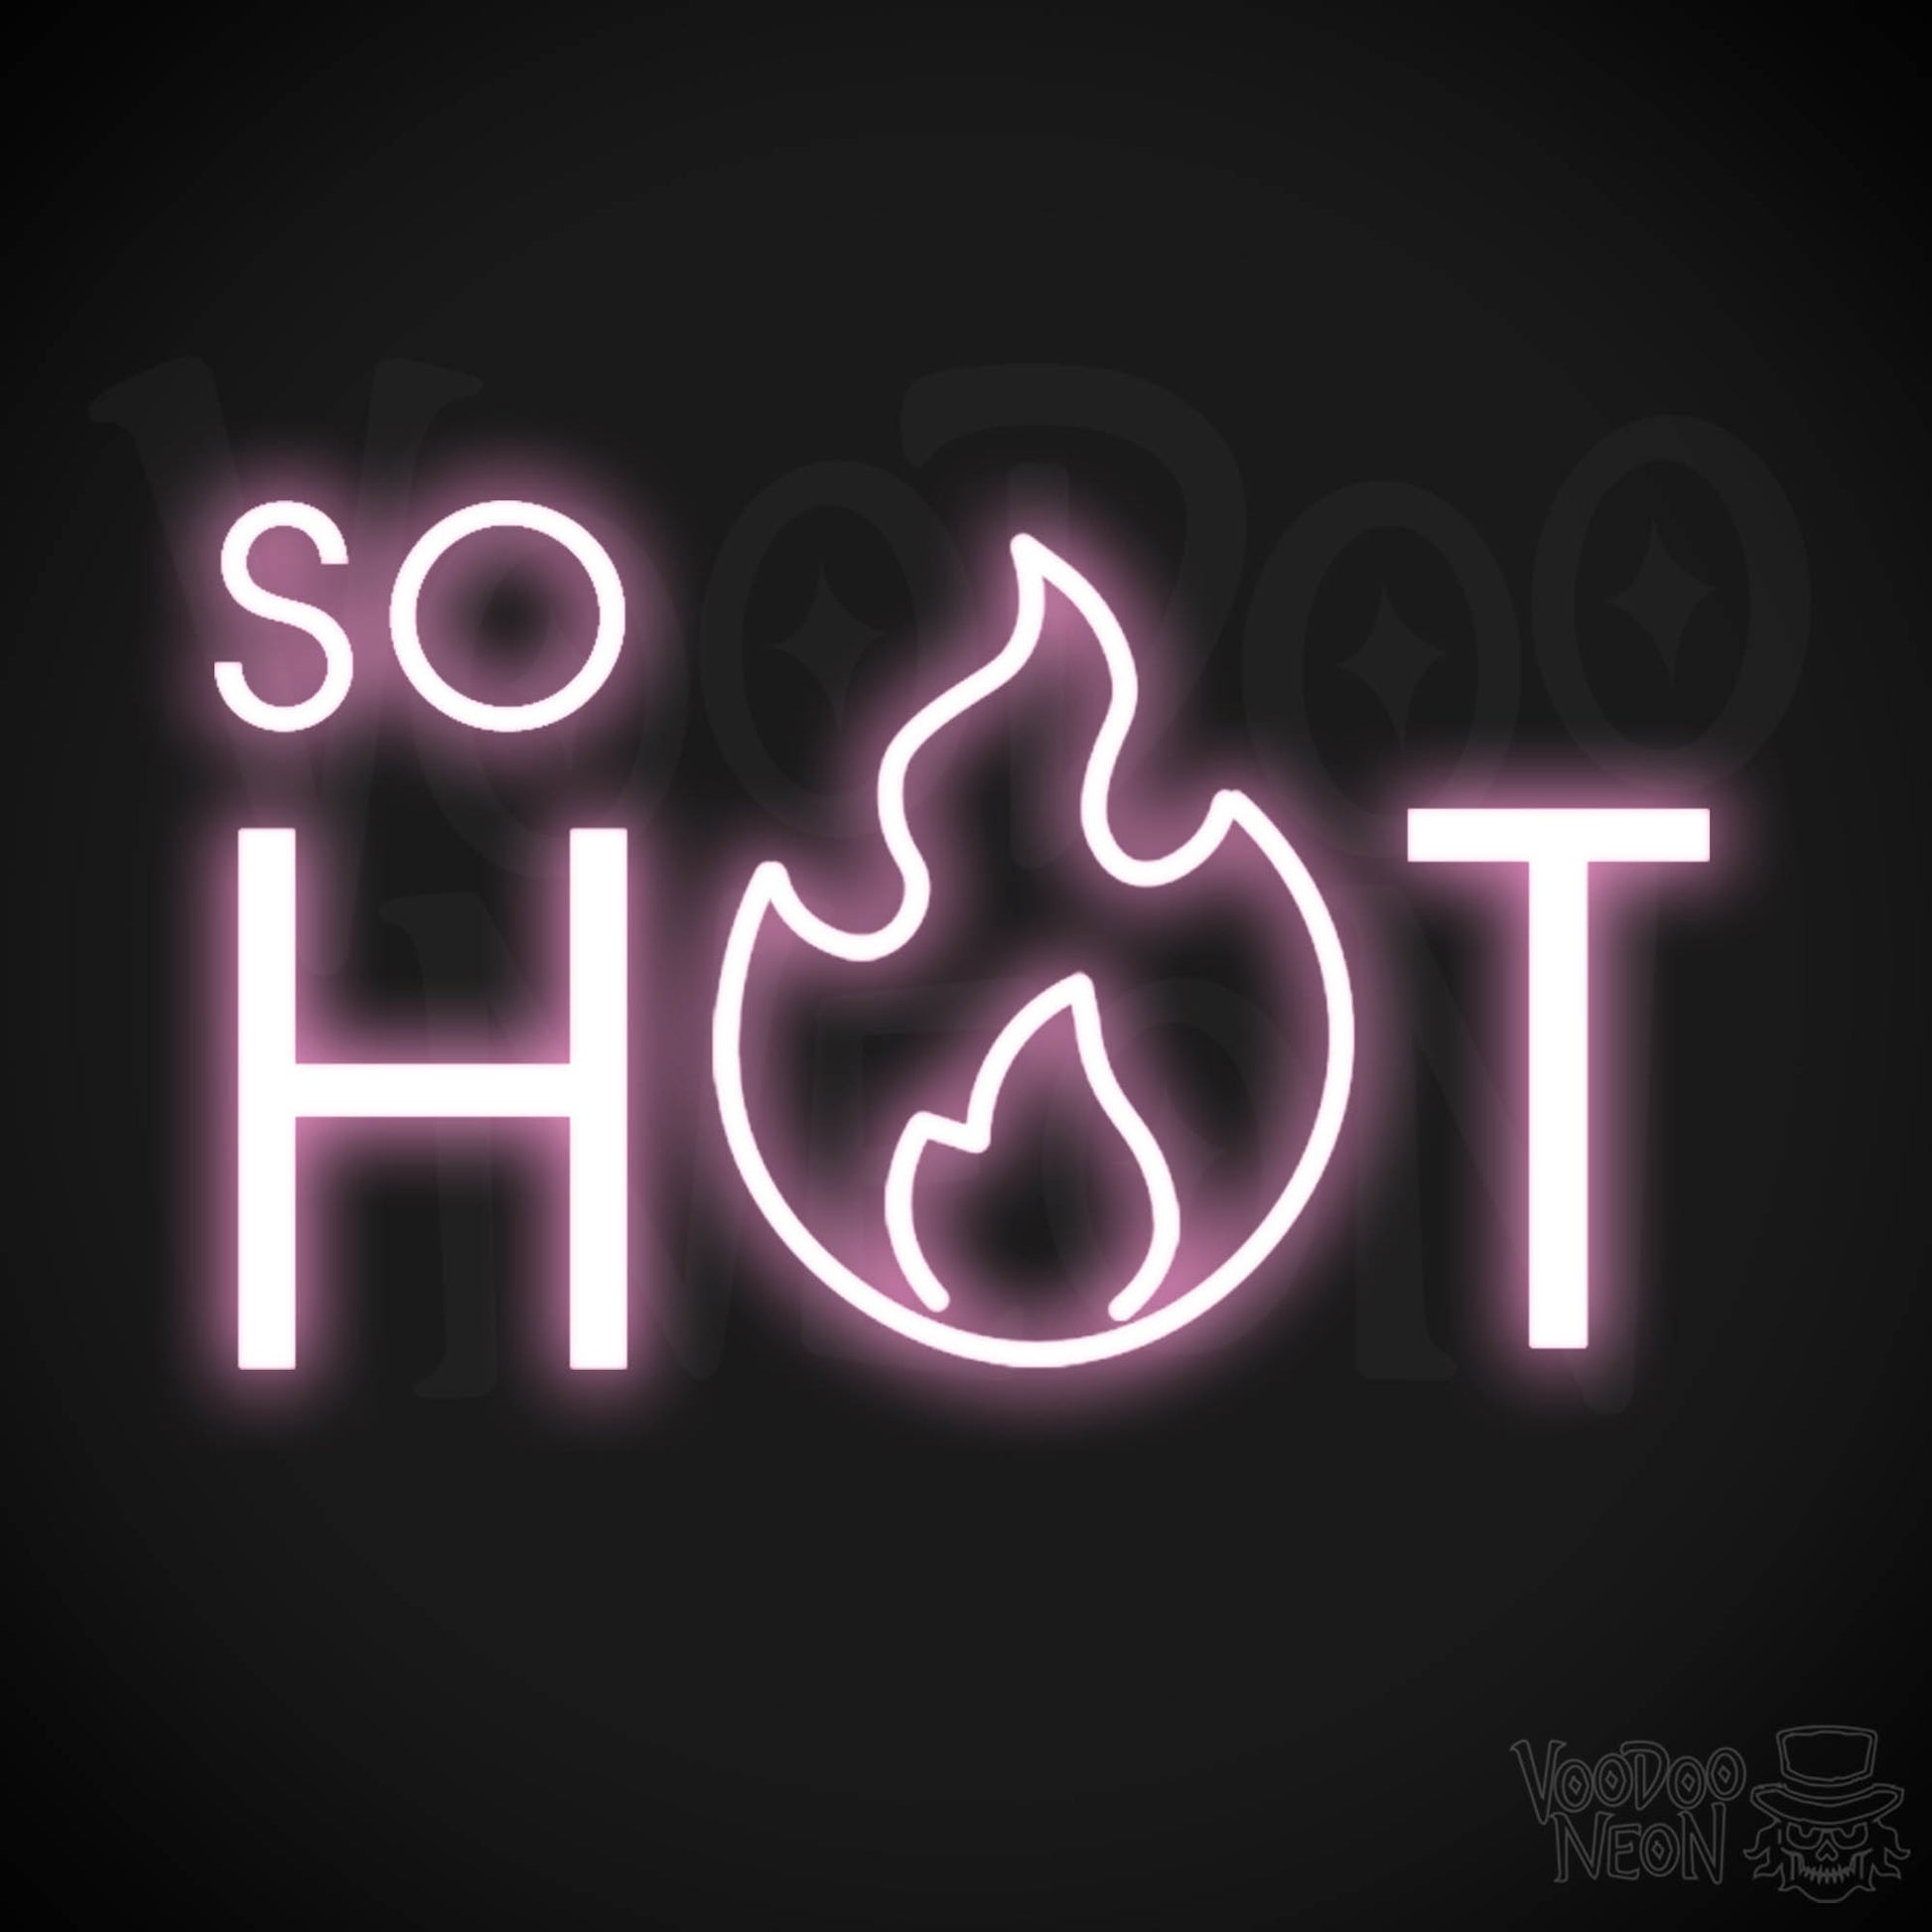 So Hot Neon Sign - Neon So Hot Sign - LED Neon Wall Art - Color Light Pink